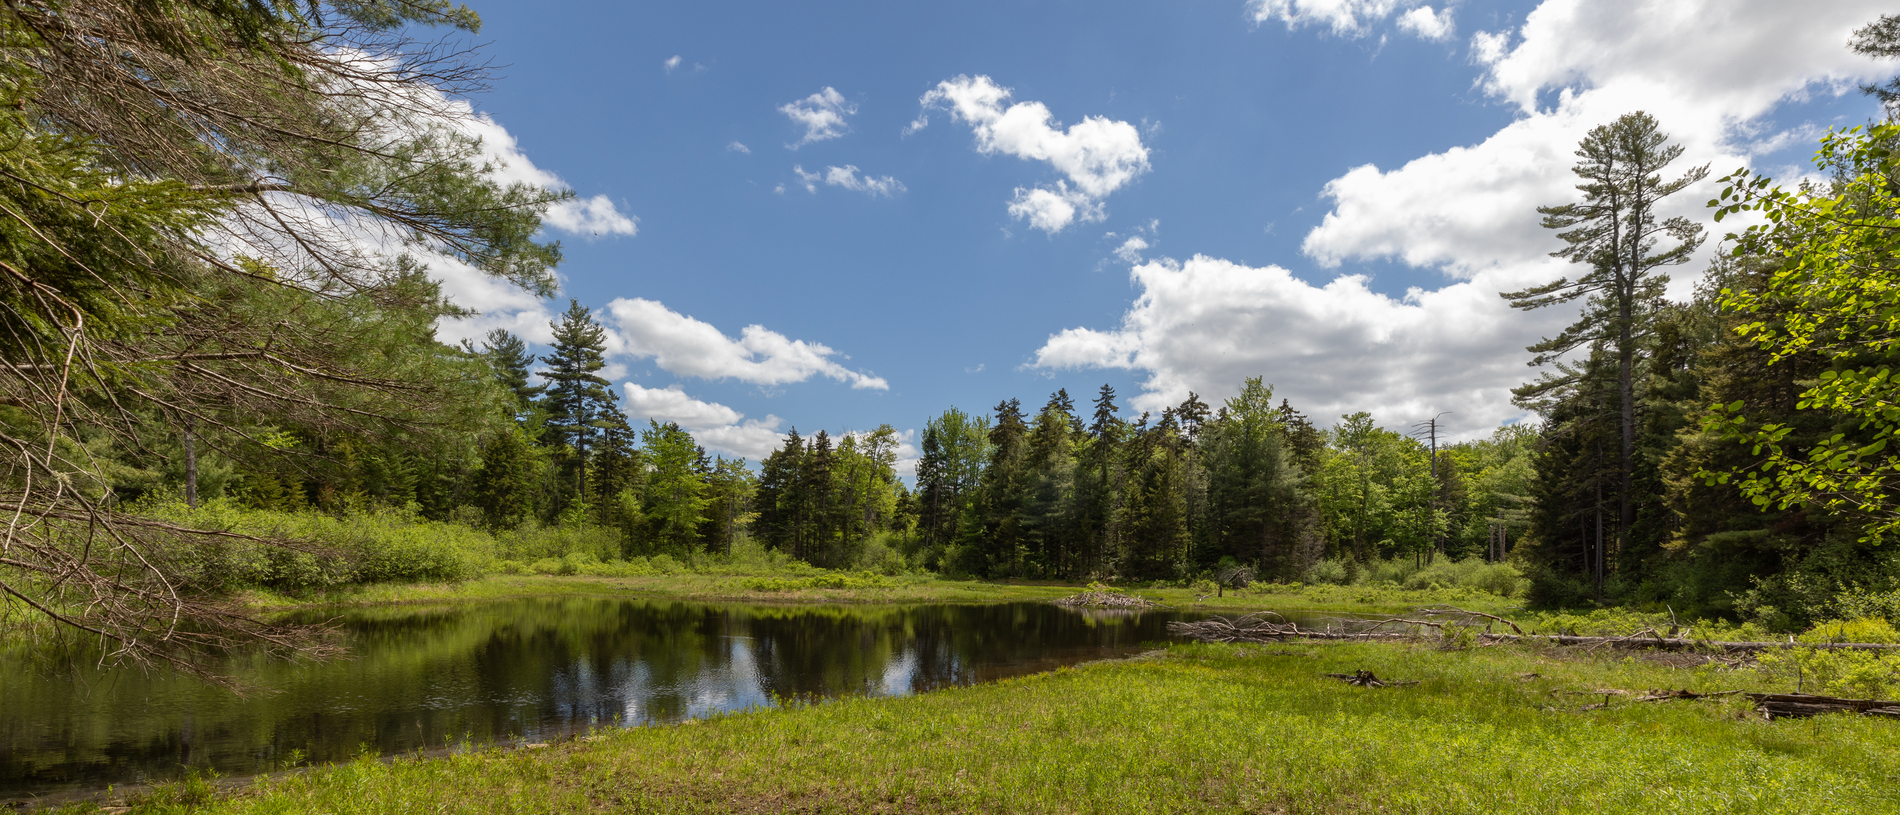 Green pine trees surround a marshy wetland. White clouds are scattered across a blue sky.